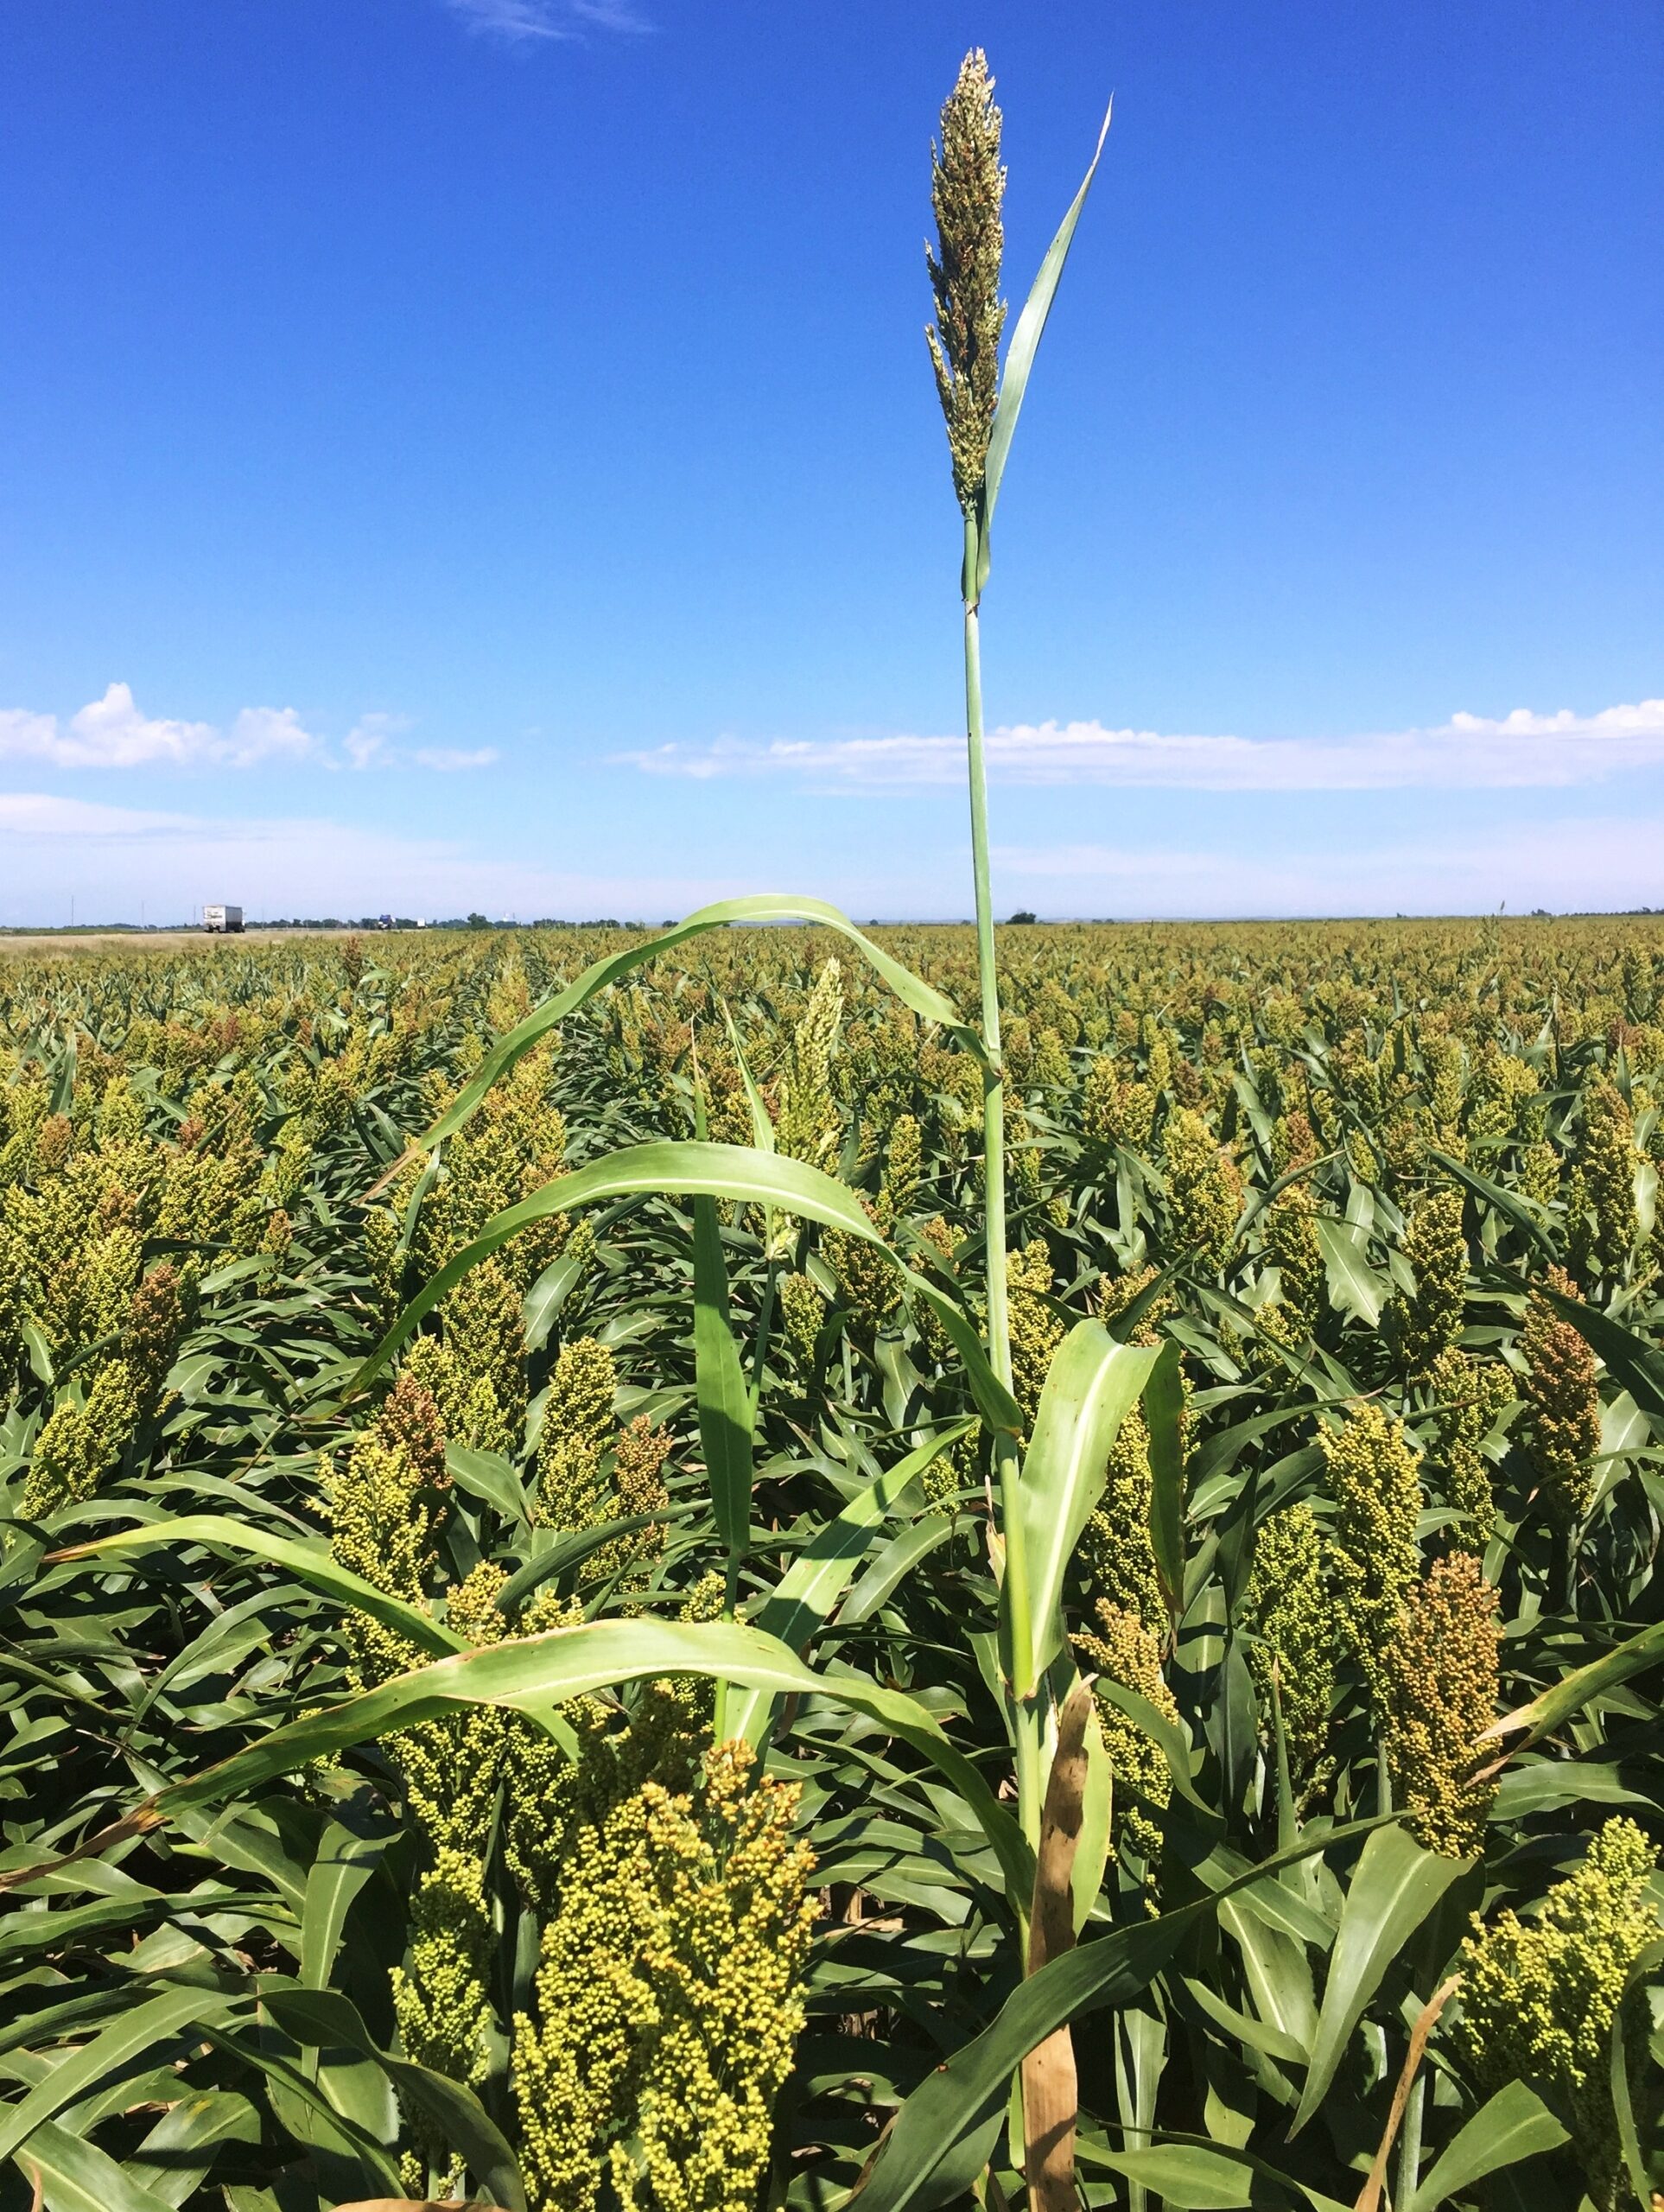 TAAT deploys Sorghum and Millet to combat food insecurity in the Sahel